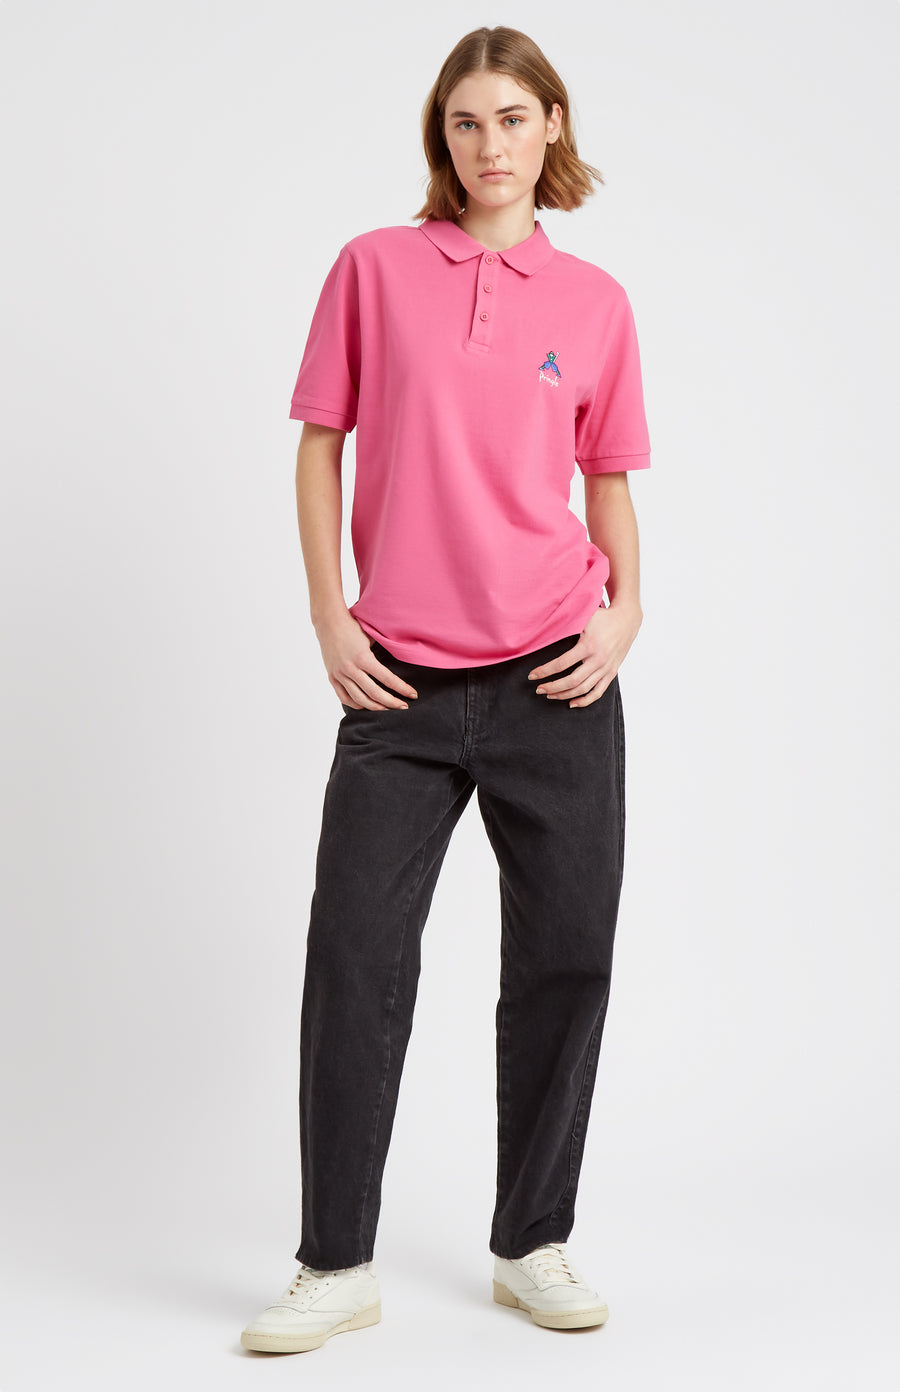 Geometric George Golf Cotton Polo Shirt In Heather Pink